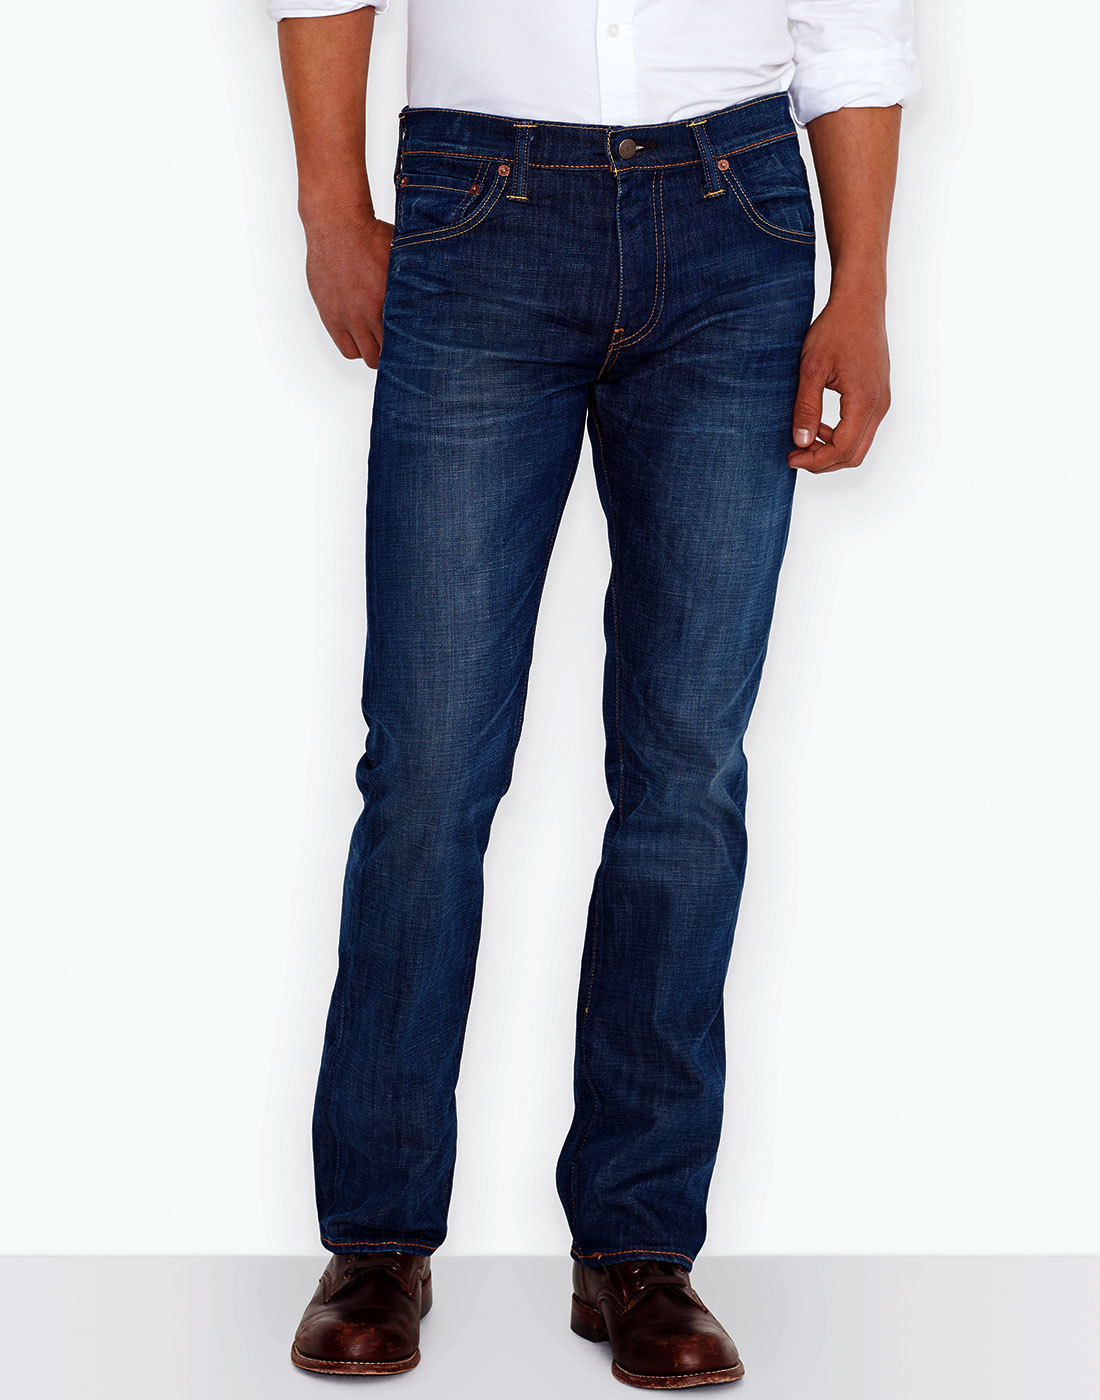 levi's 527 bootcut mostly mid blue